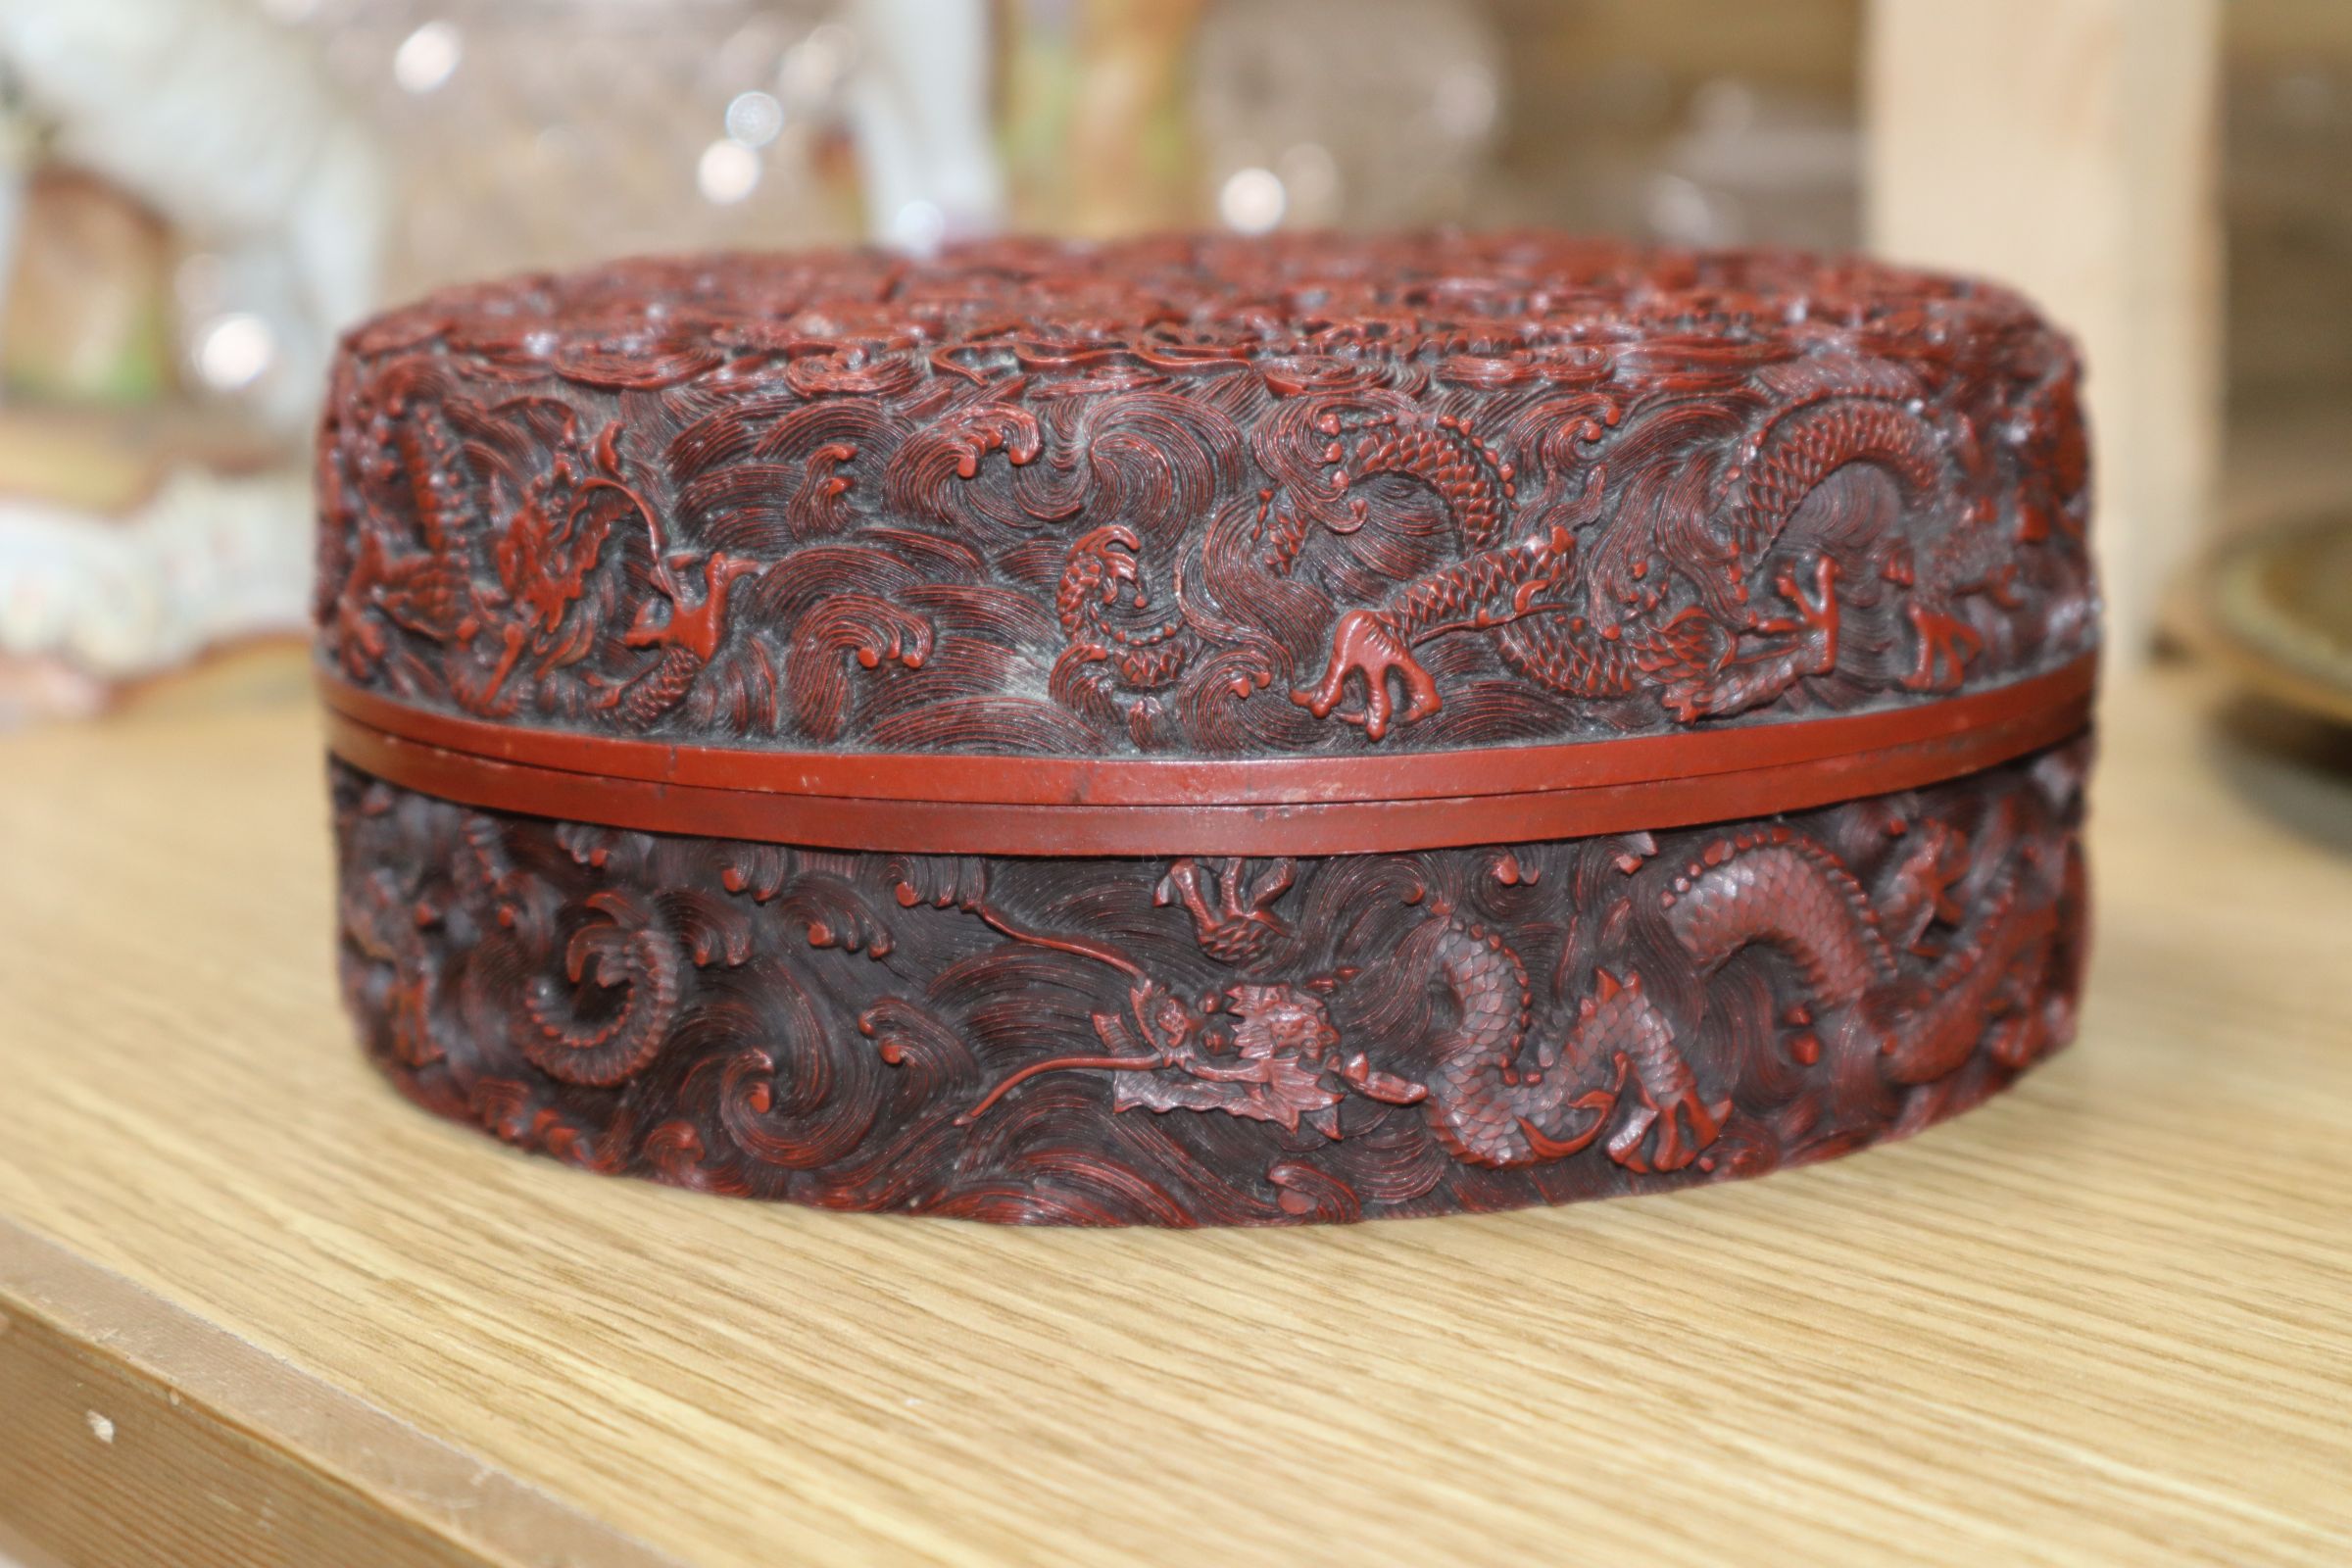 A Chinese bronze vase, a Persian dish and a 'Dragon' box dish diameter 36cm - Image 8 of 20